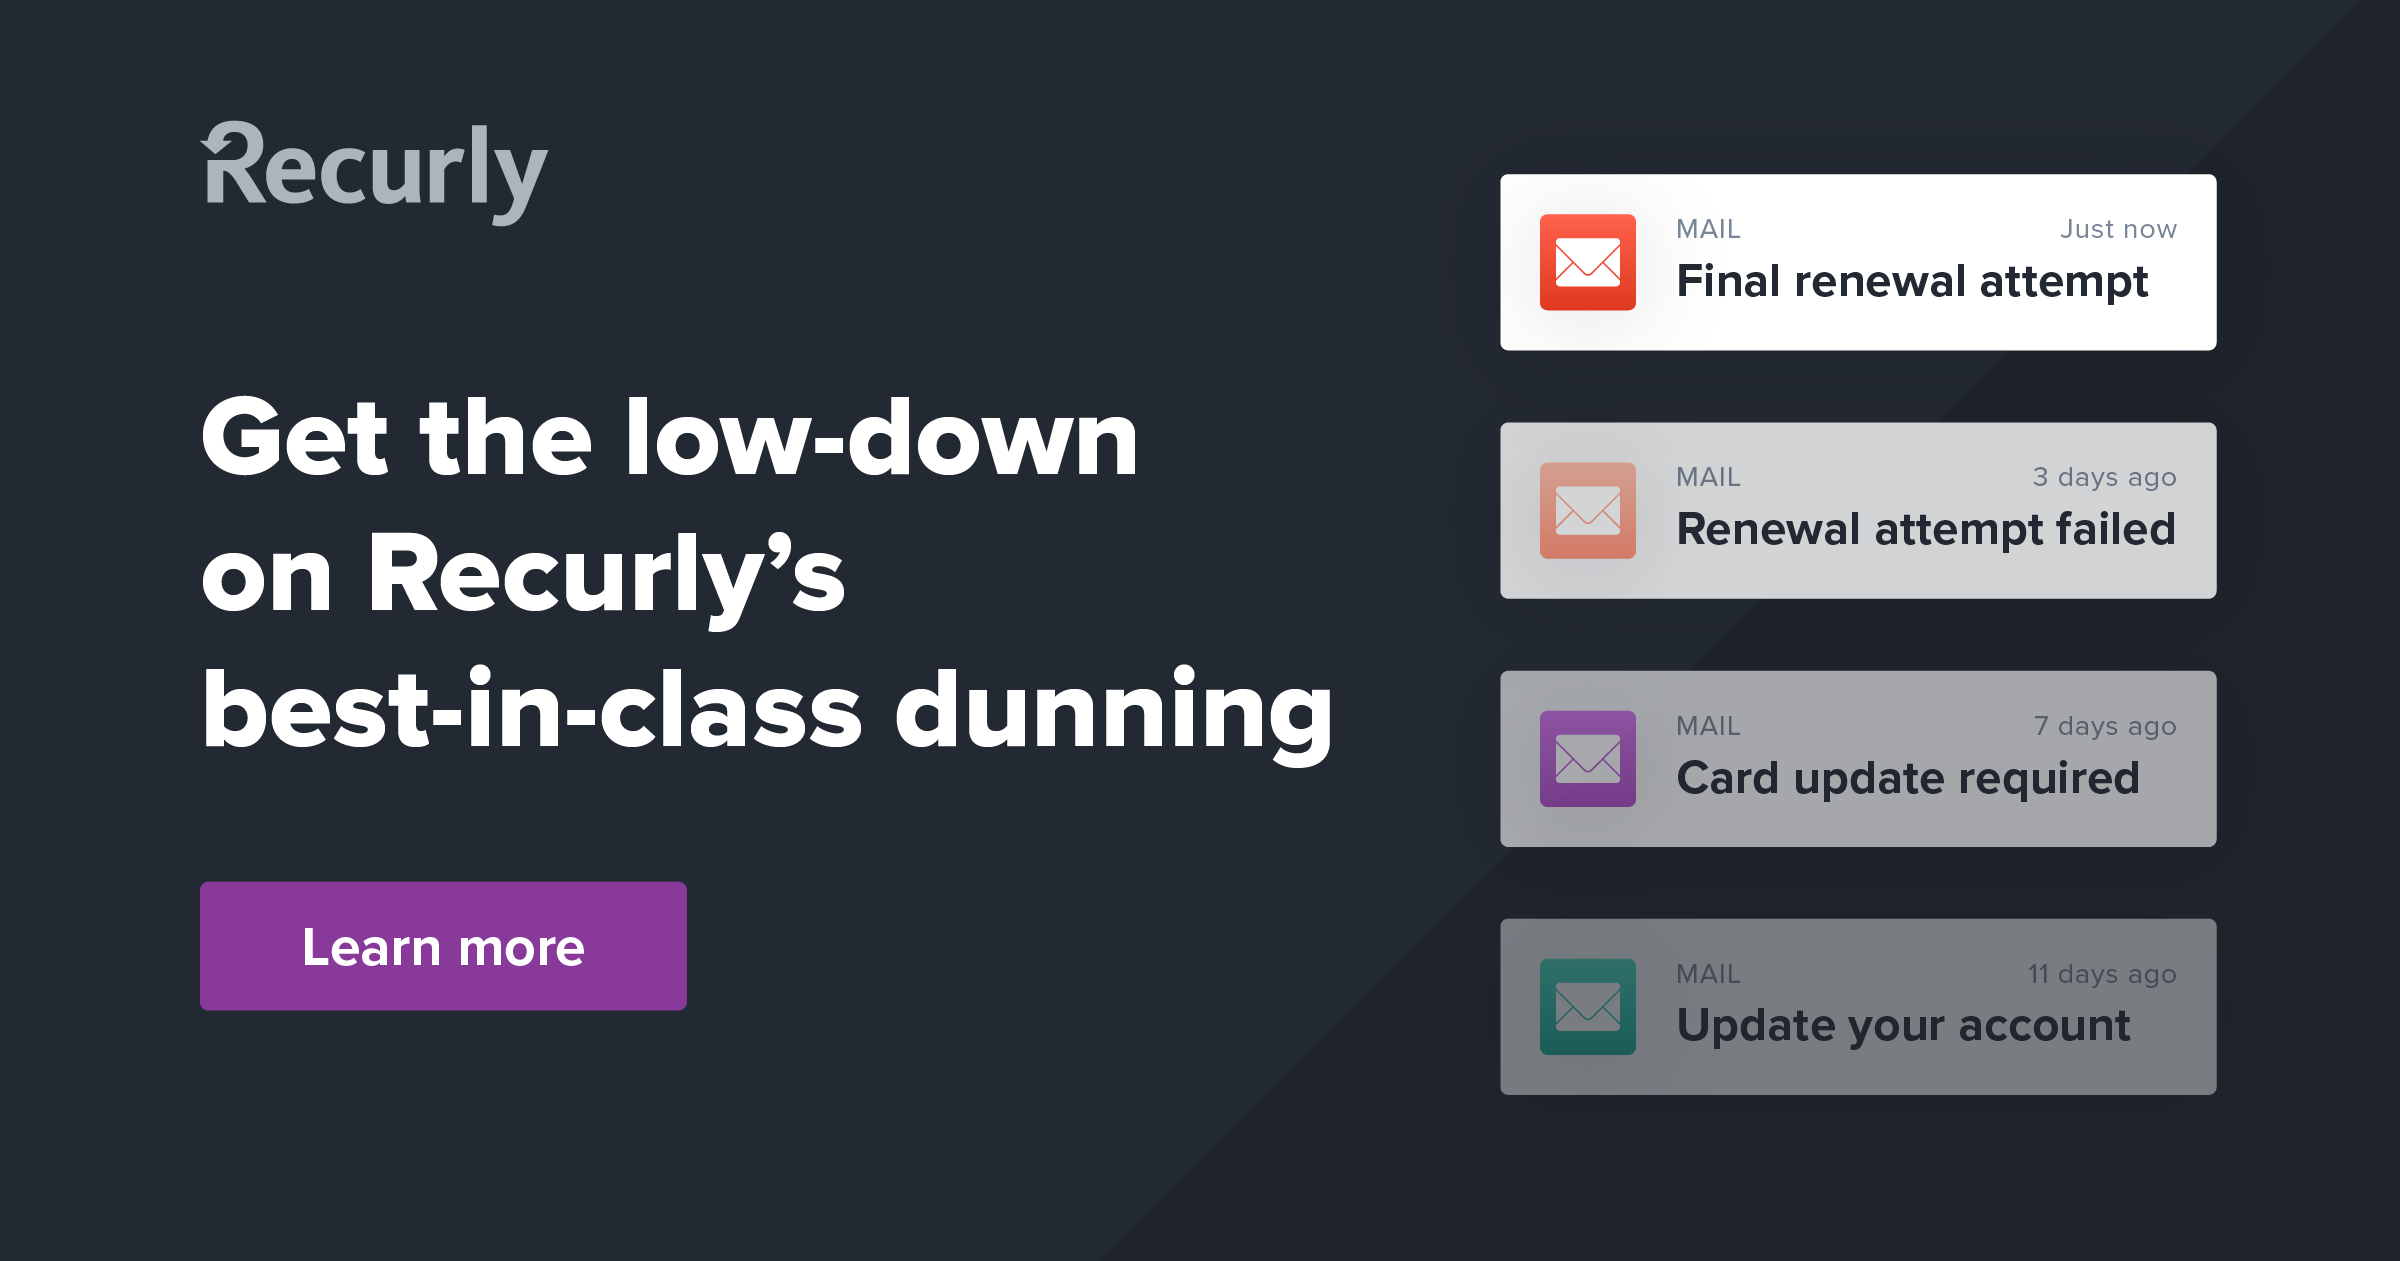 Get the low-down on Recurly's best-in-class dunning